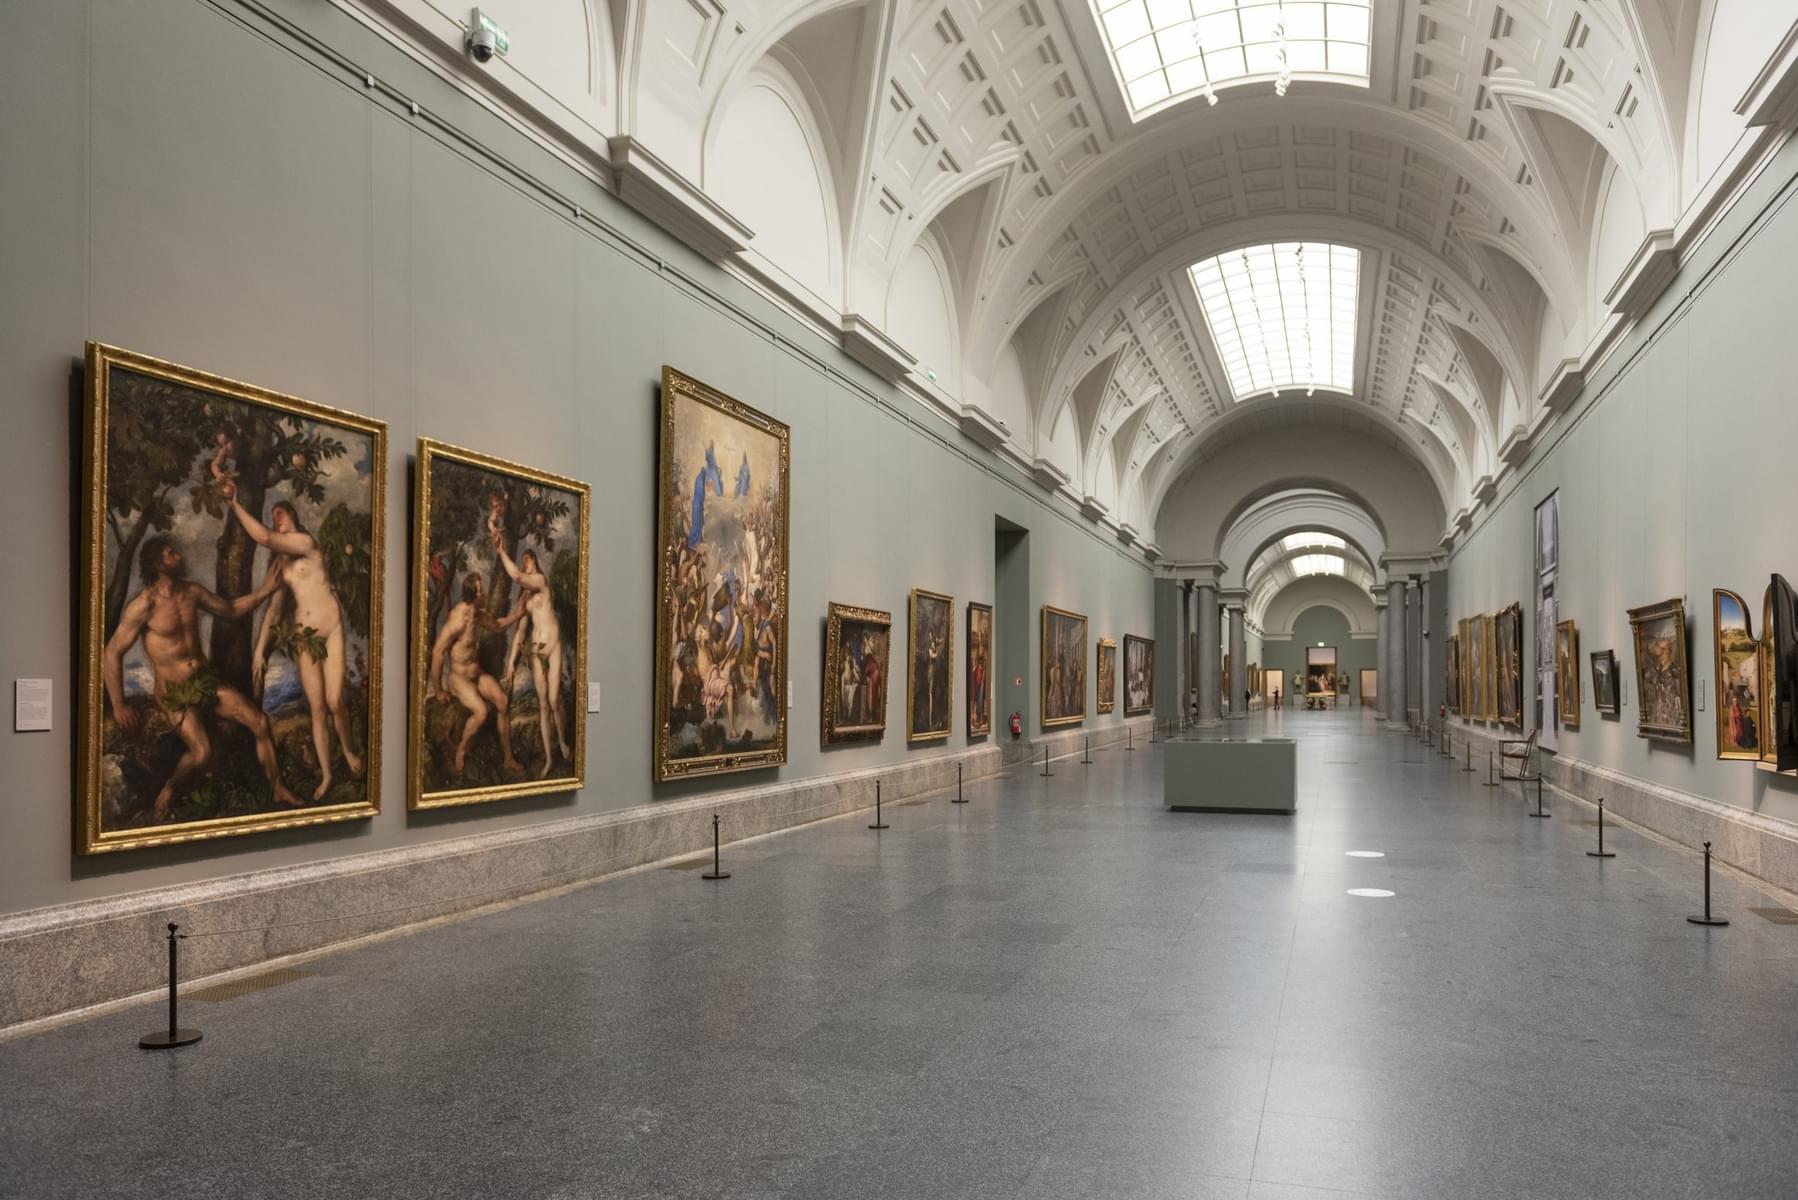 Stroll through the halls of this beautiful museum